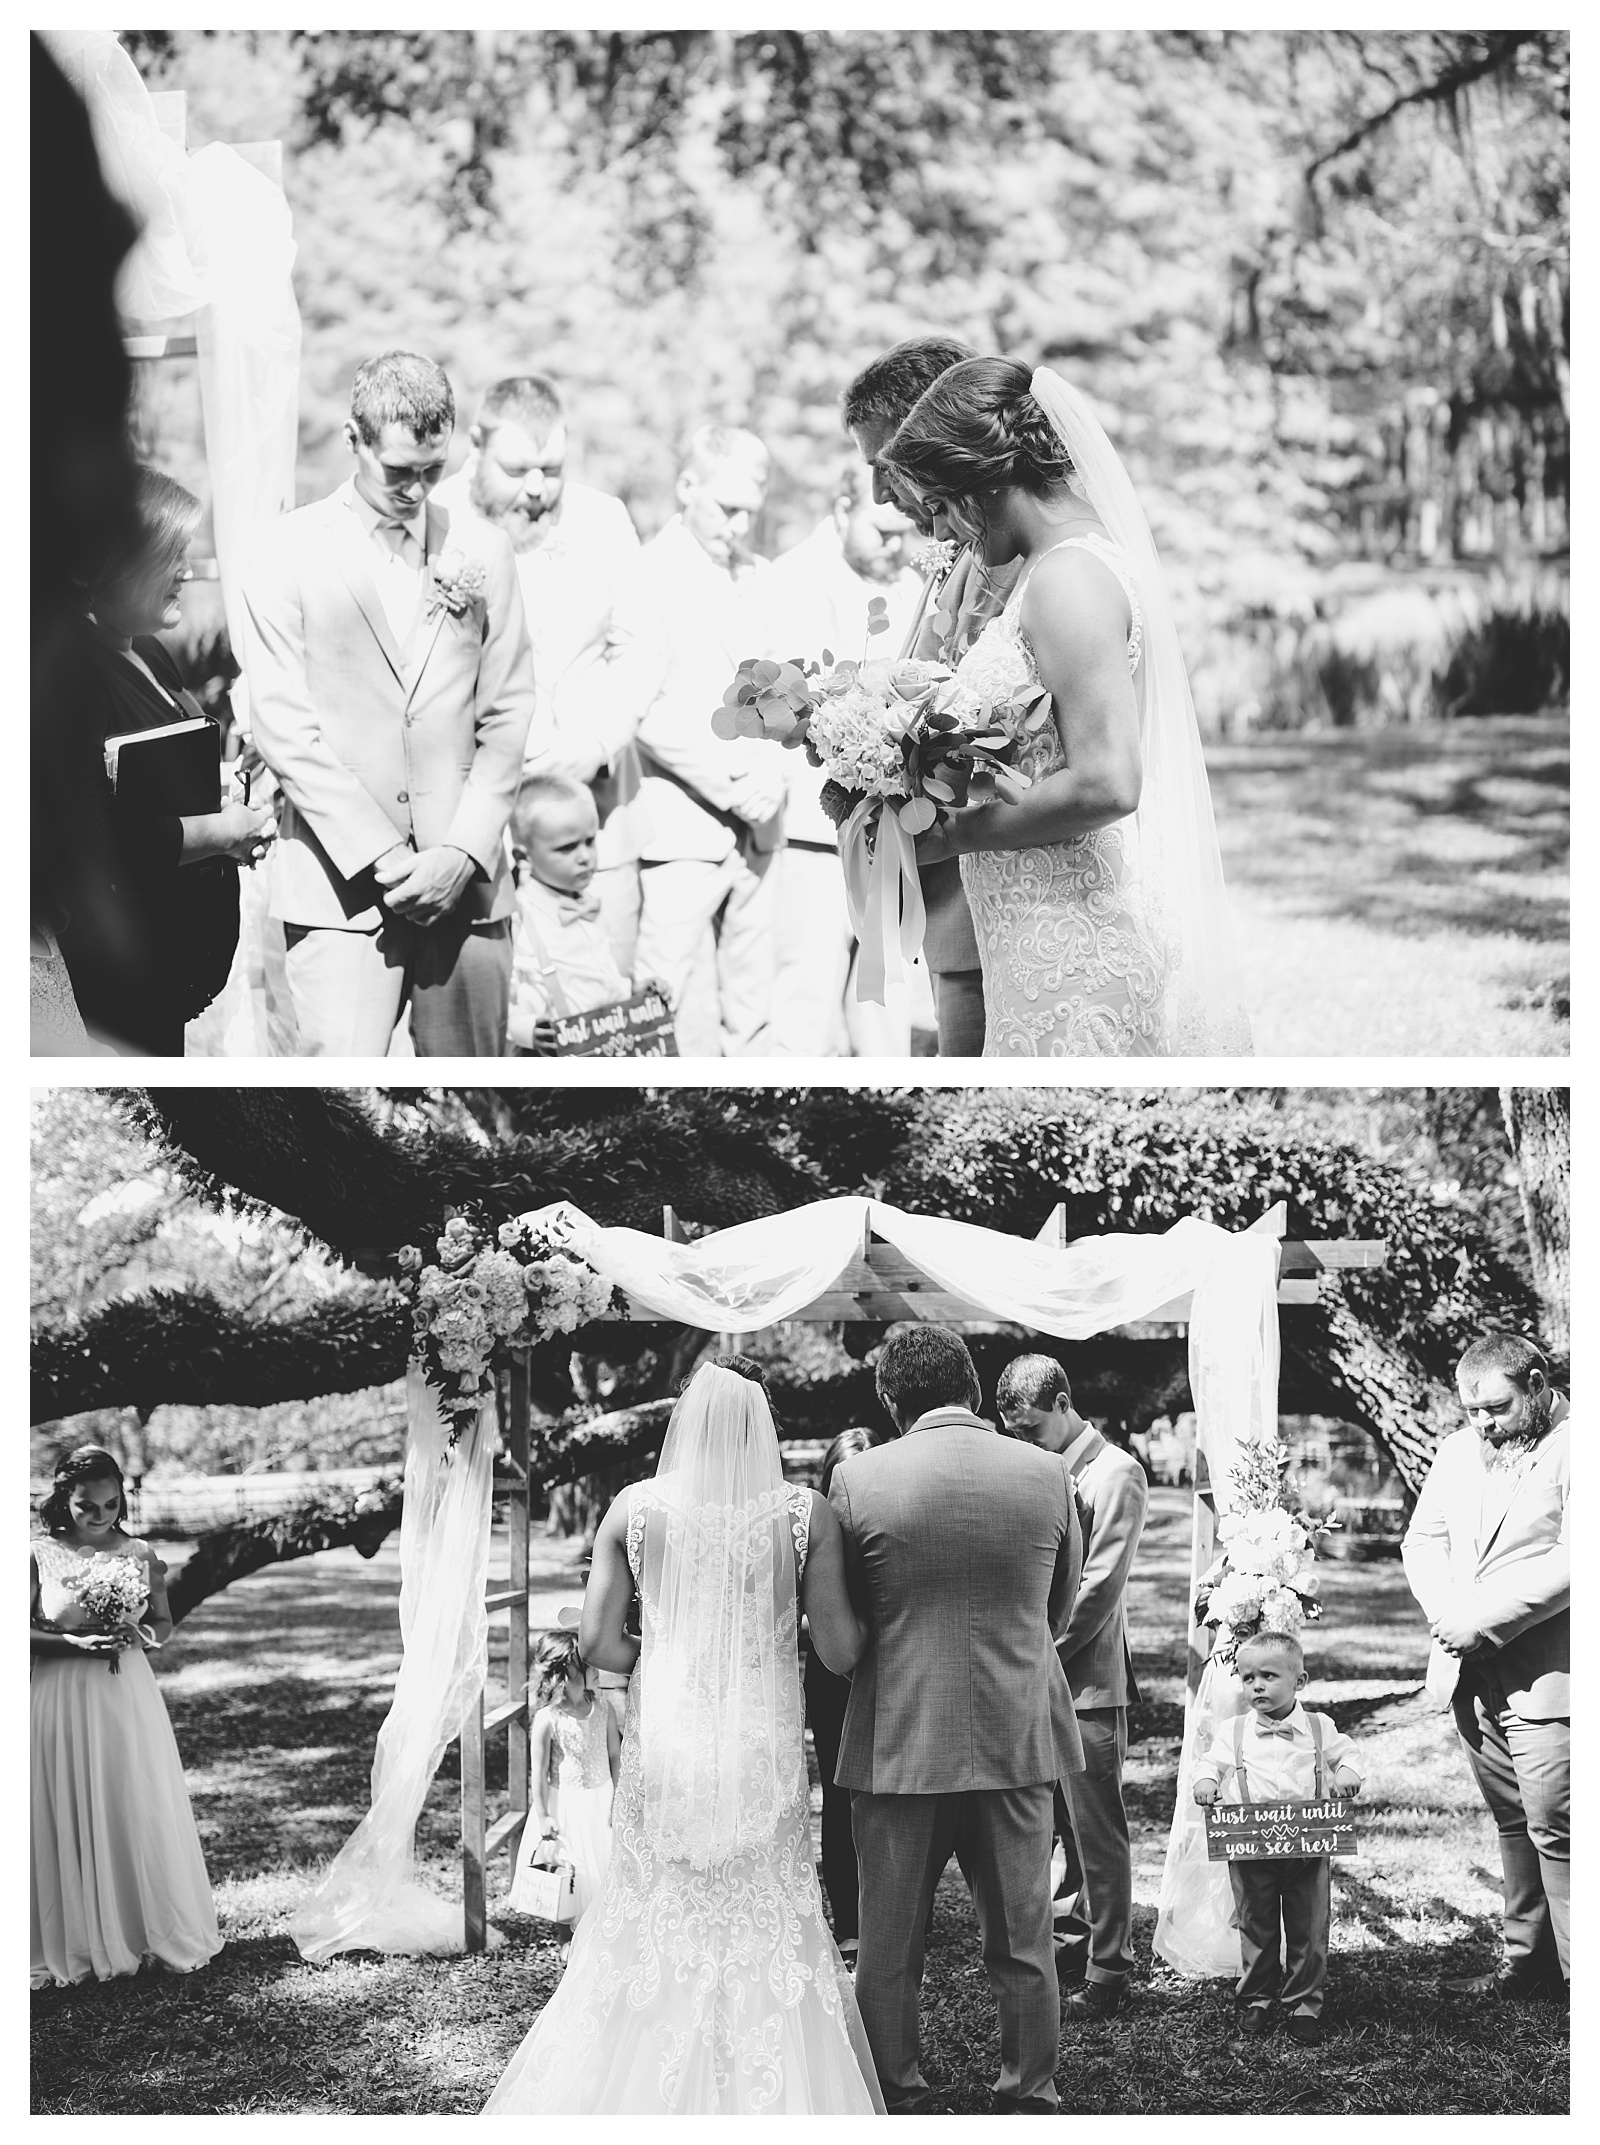 Black and white wedding ceremony photos by professional wedding photographer in Tallahassee, FL. Shelly Williams Photography